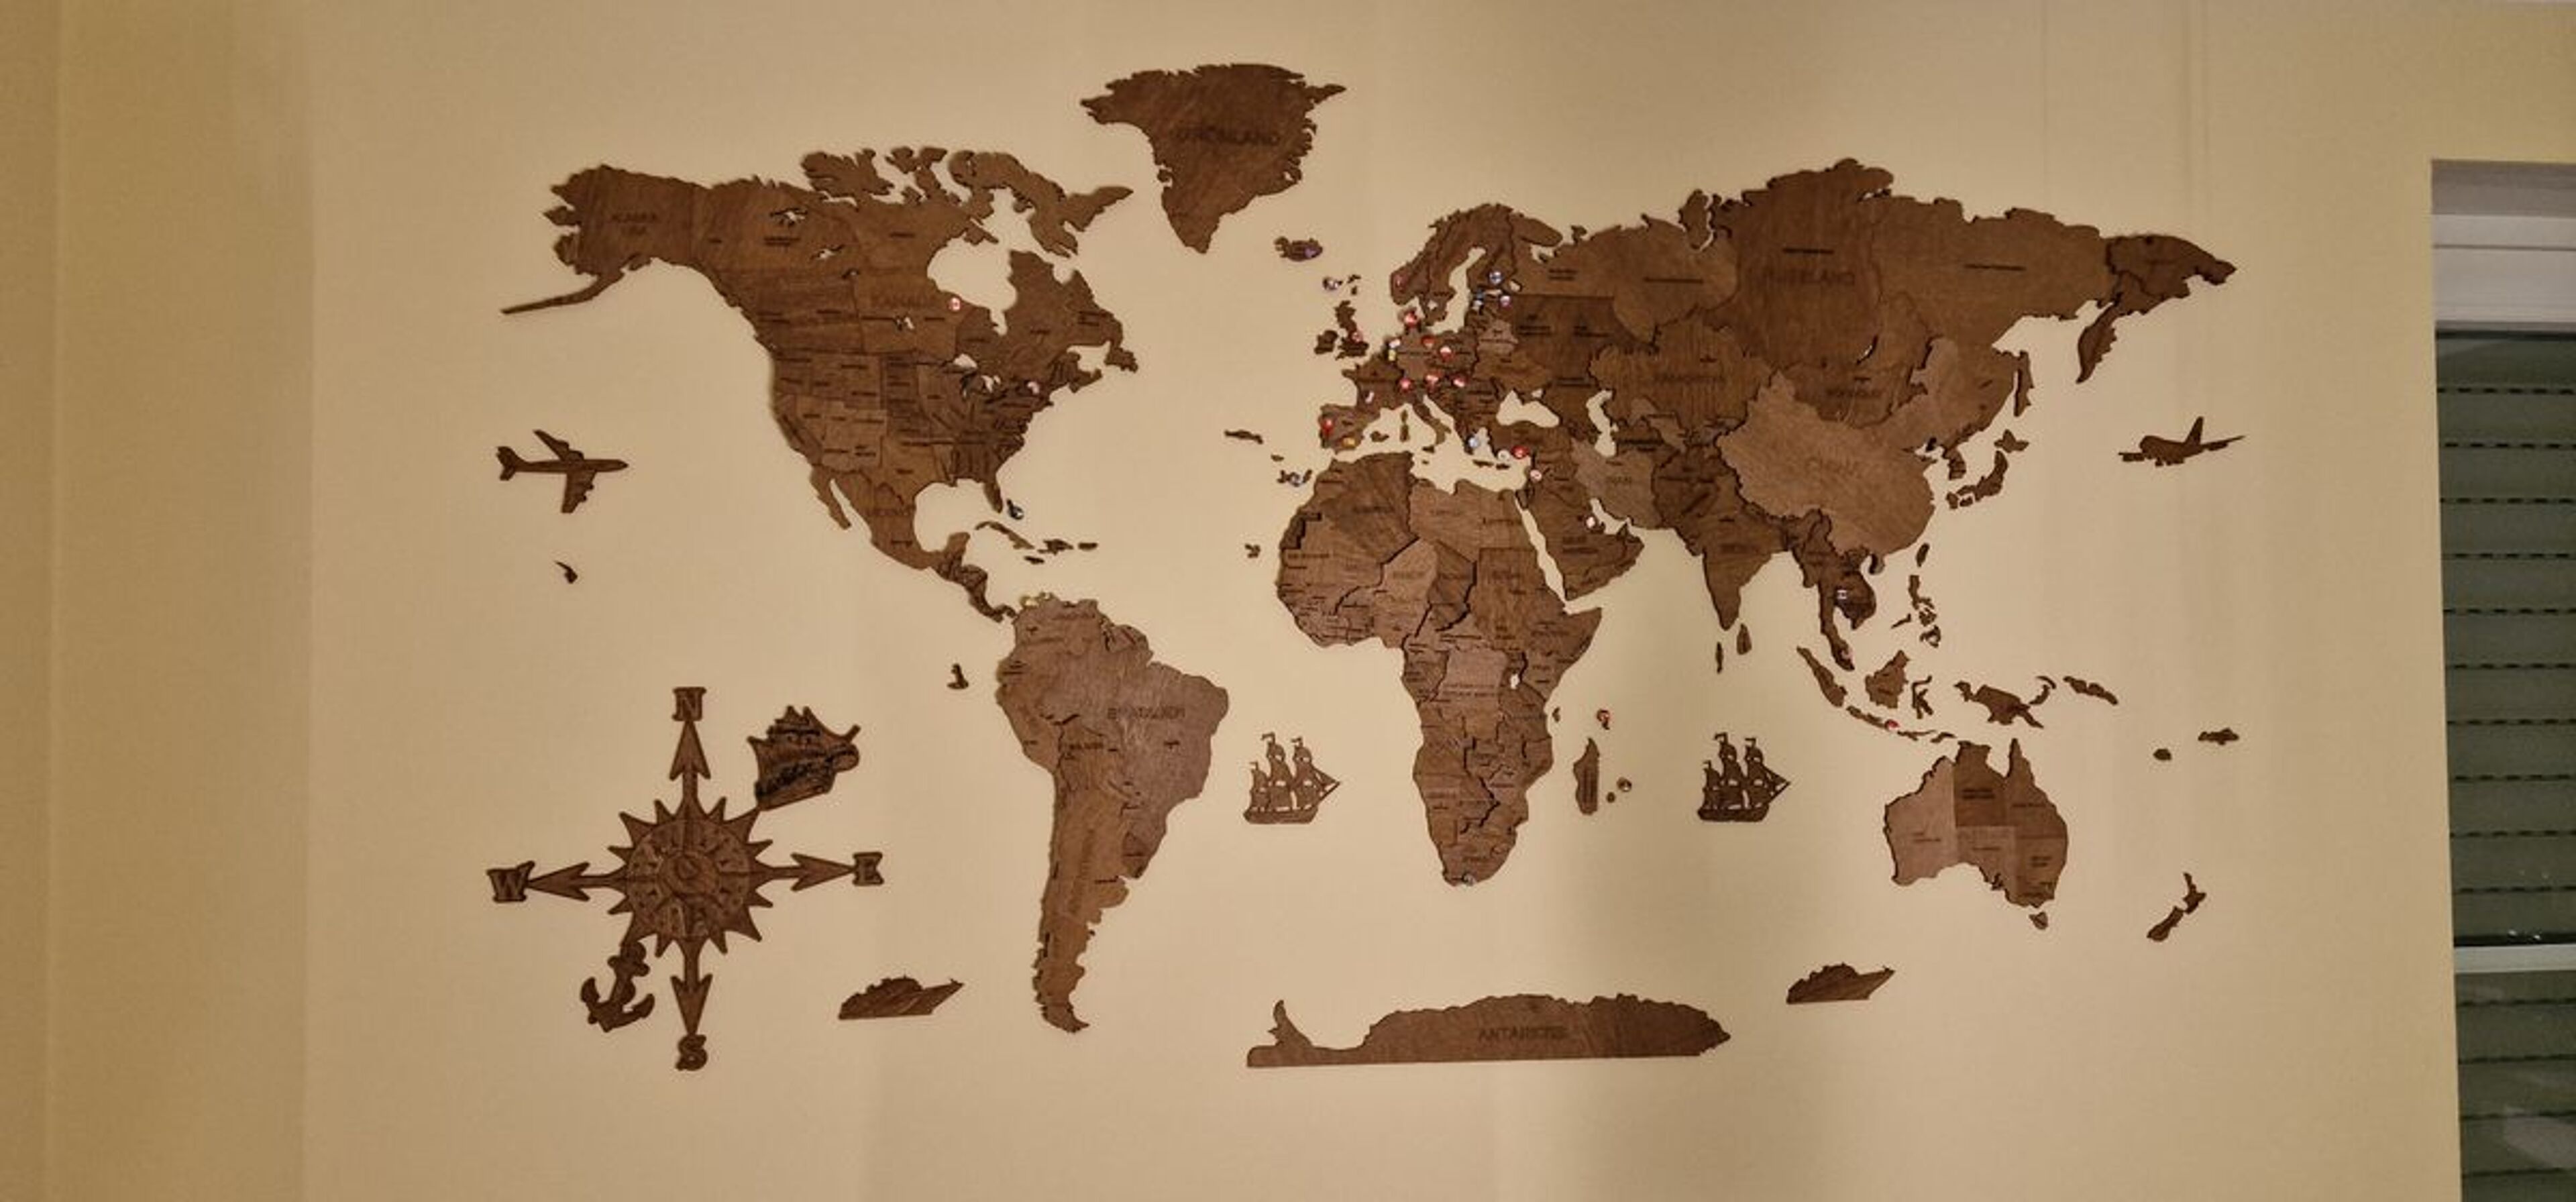 Review for Wooden World Map Wall Decoration - image from Christian Wagner